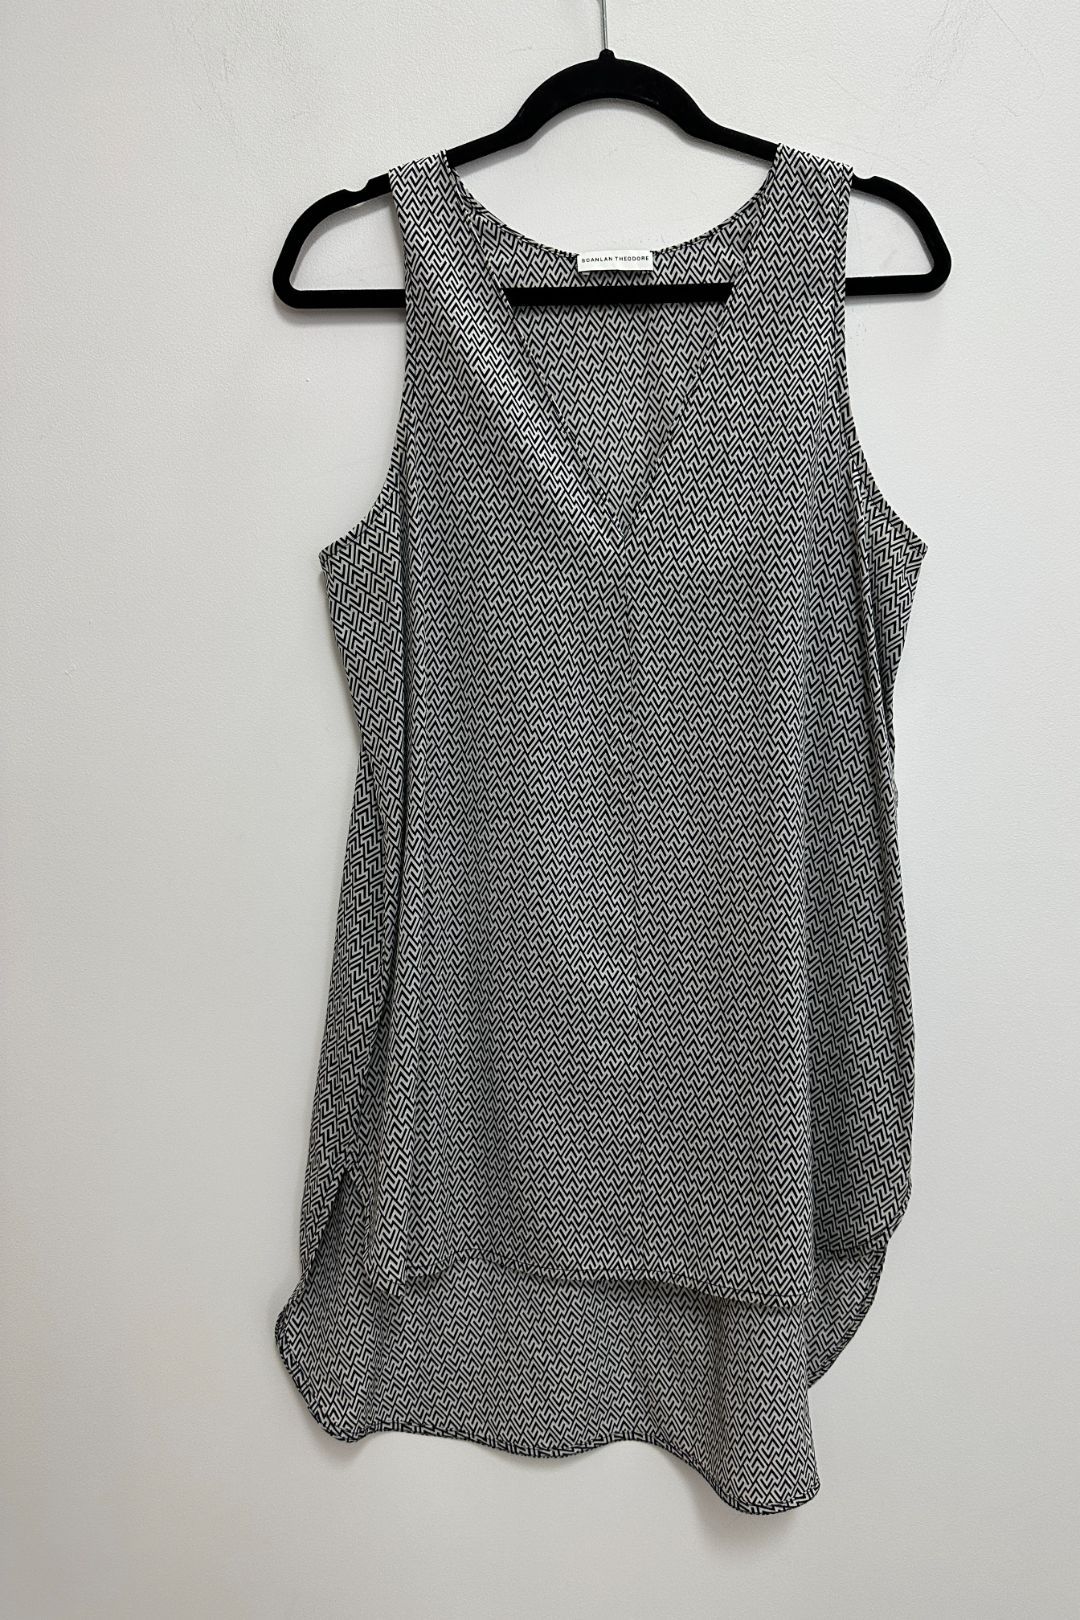 Scanlan Theodore - Black and White Zig Zag Patterned Tank Top